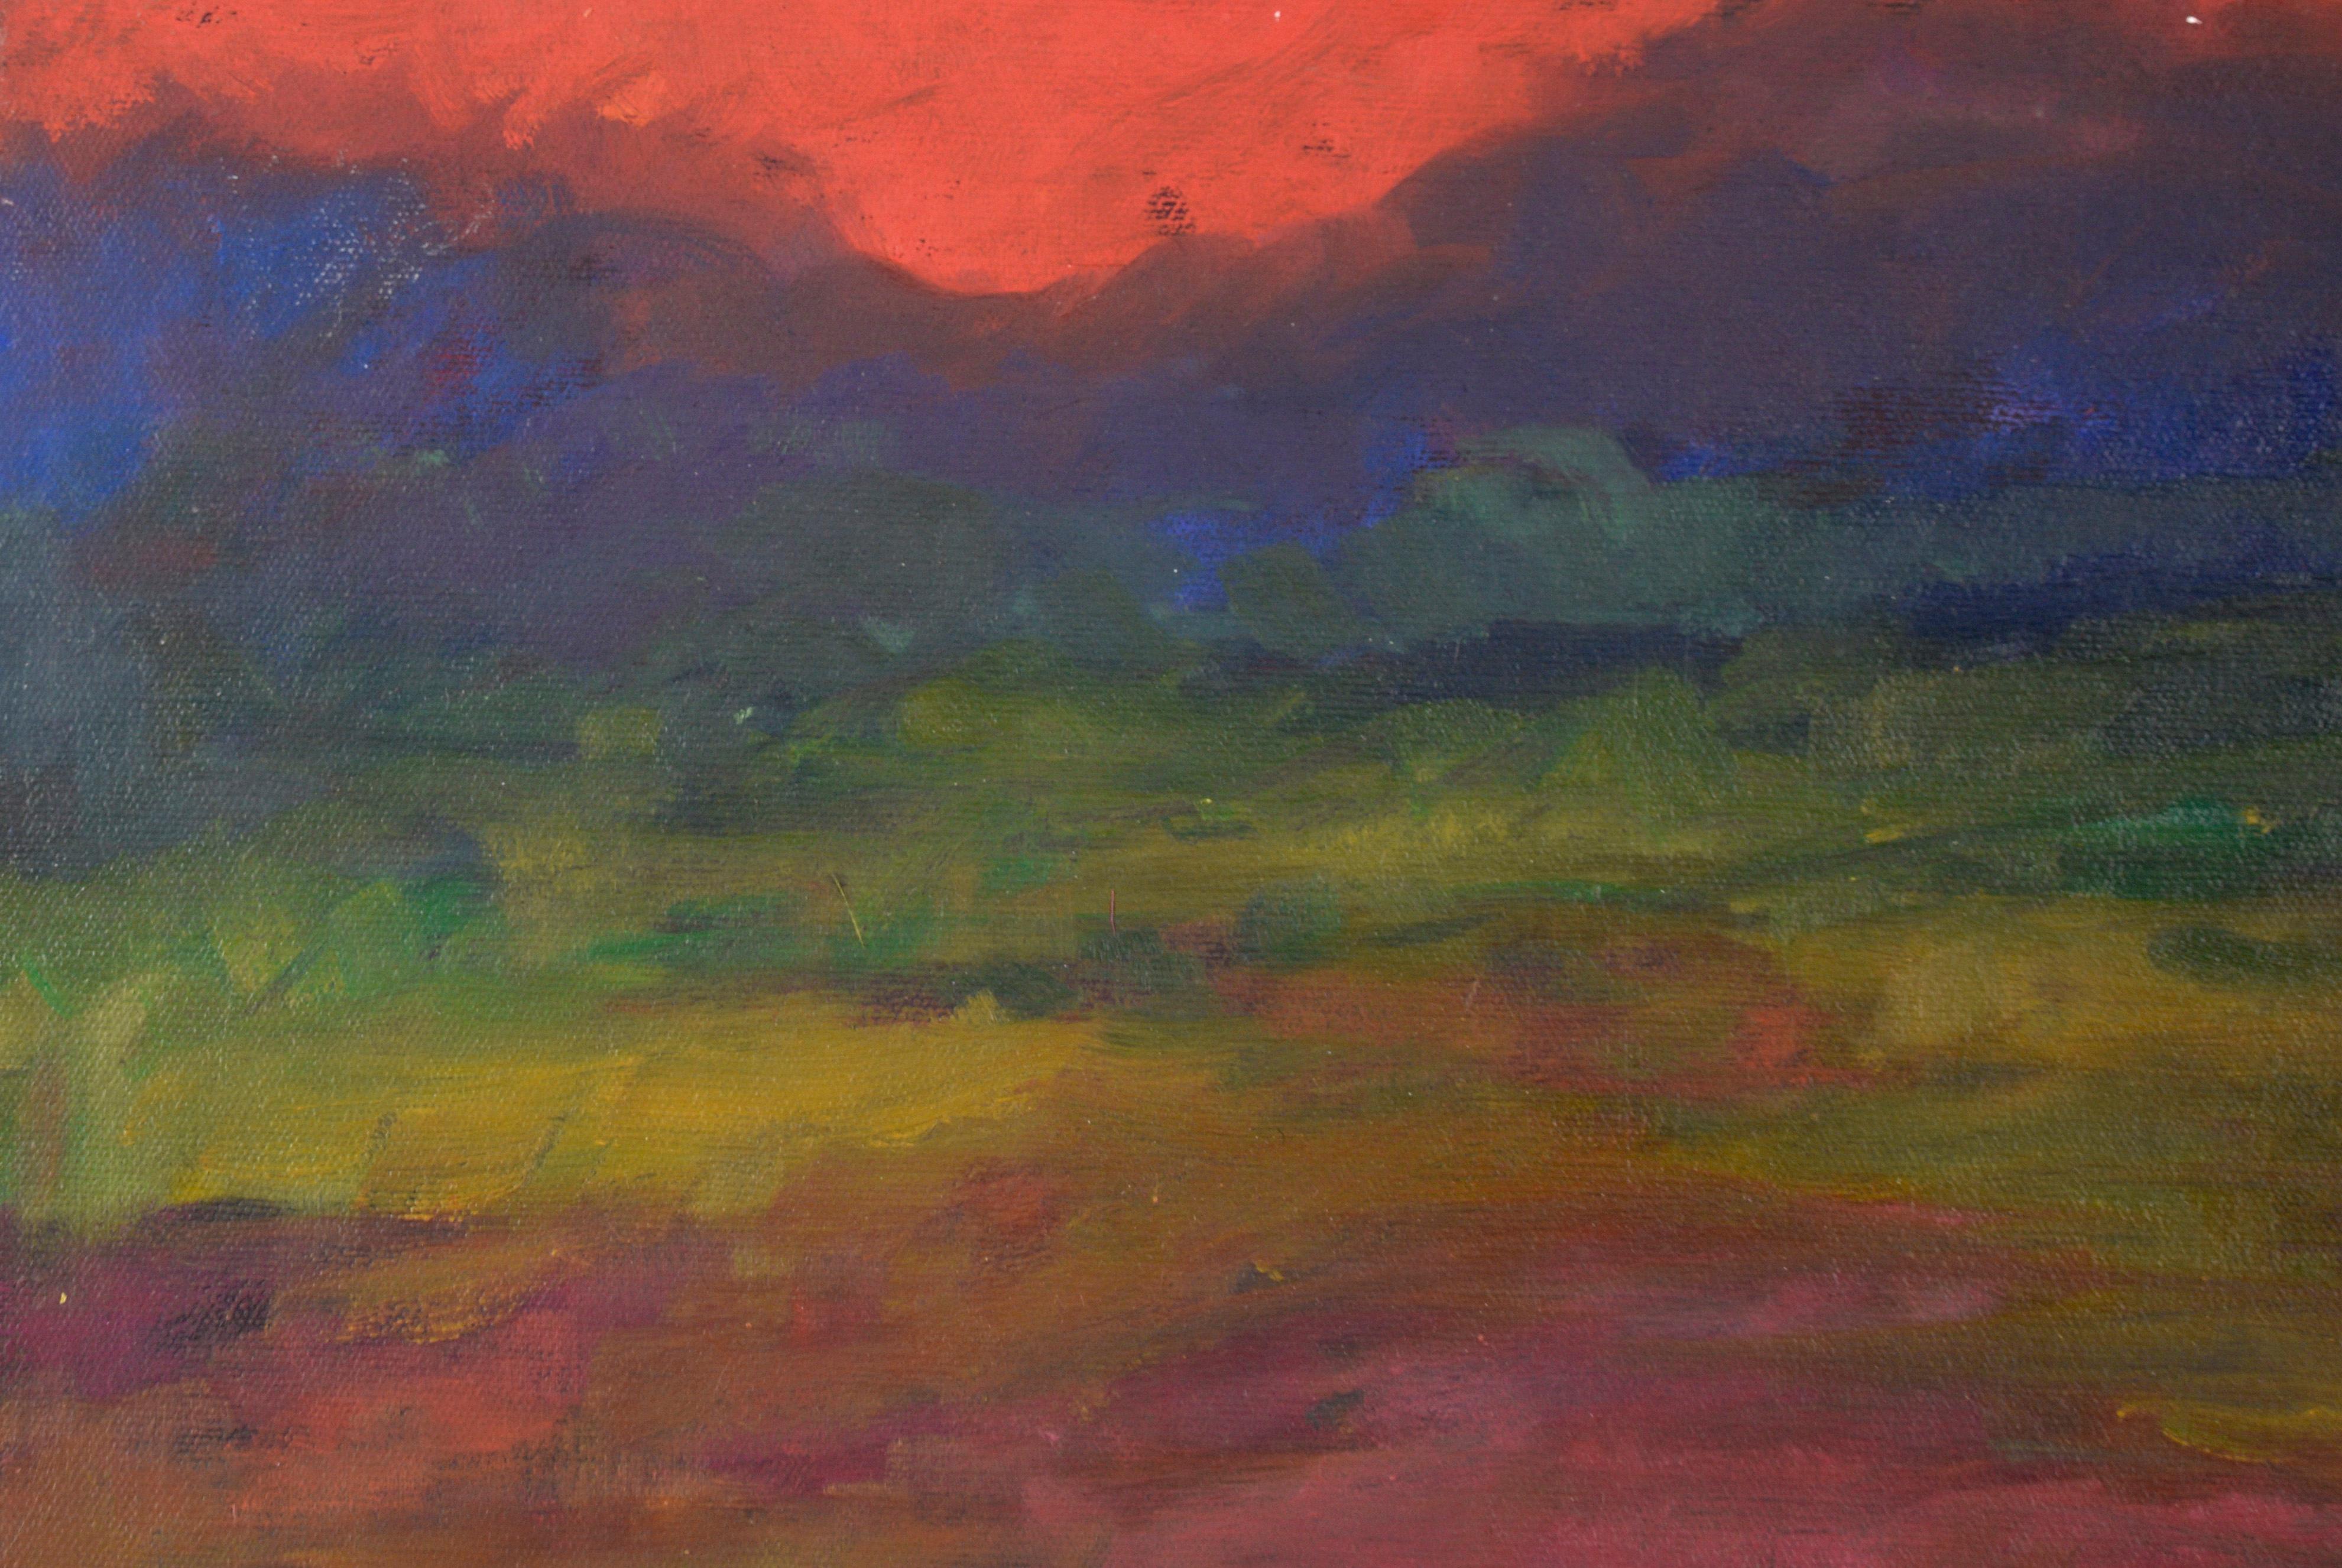 Glowing Red Sunset - Abstracted Landscape in Acrylic on Canvas - Painting by M. Pavao